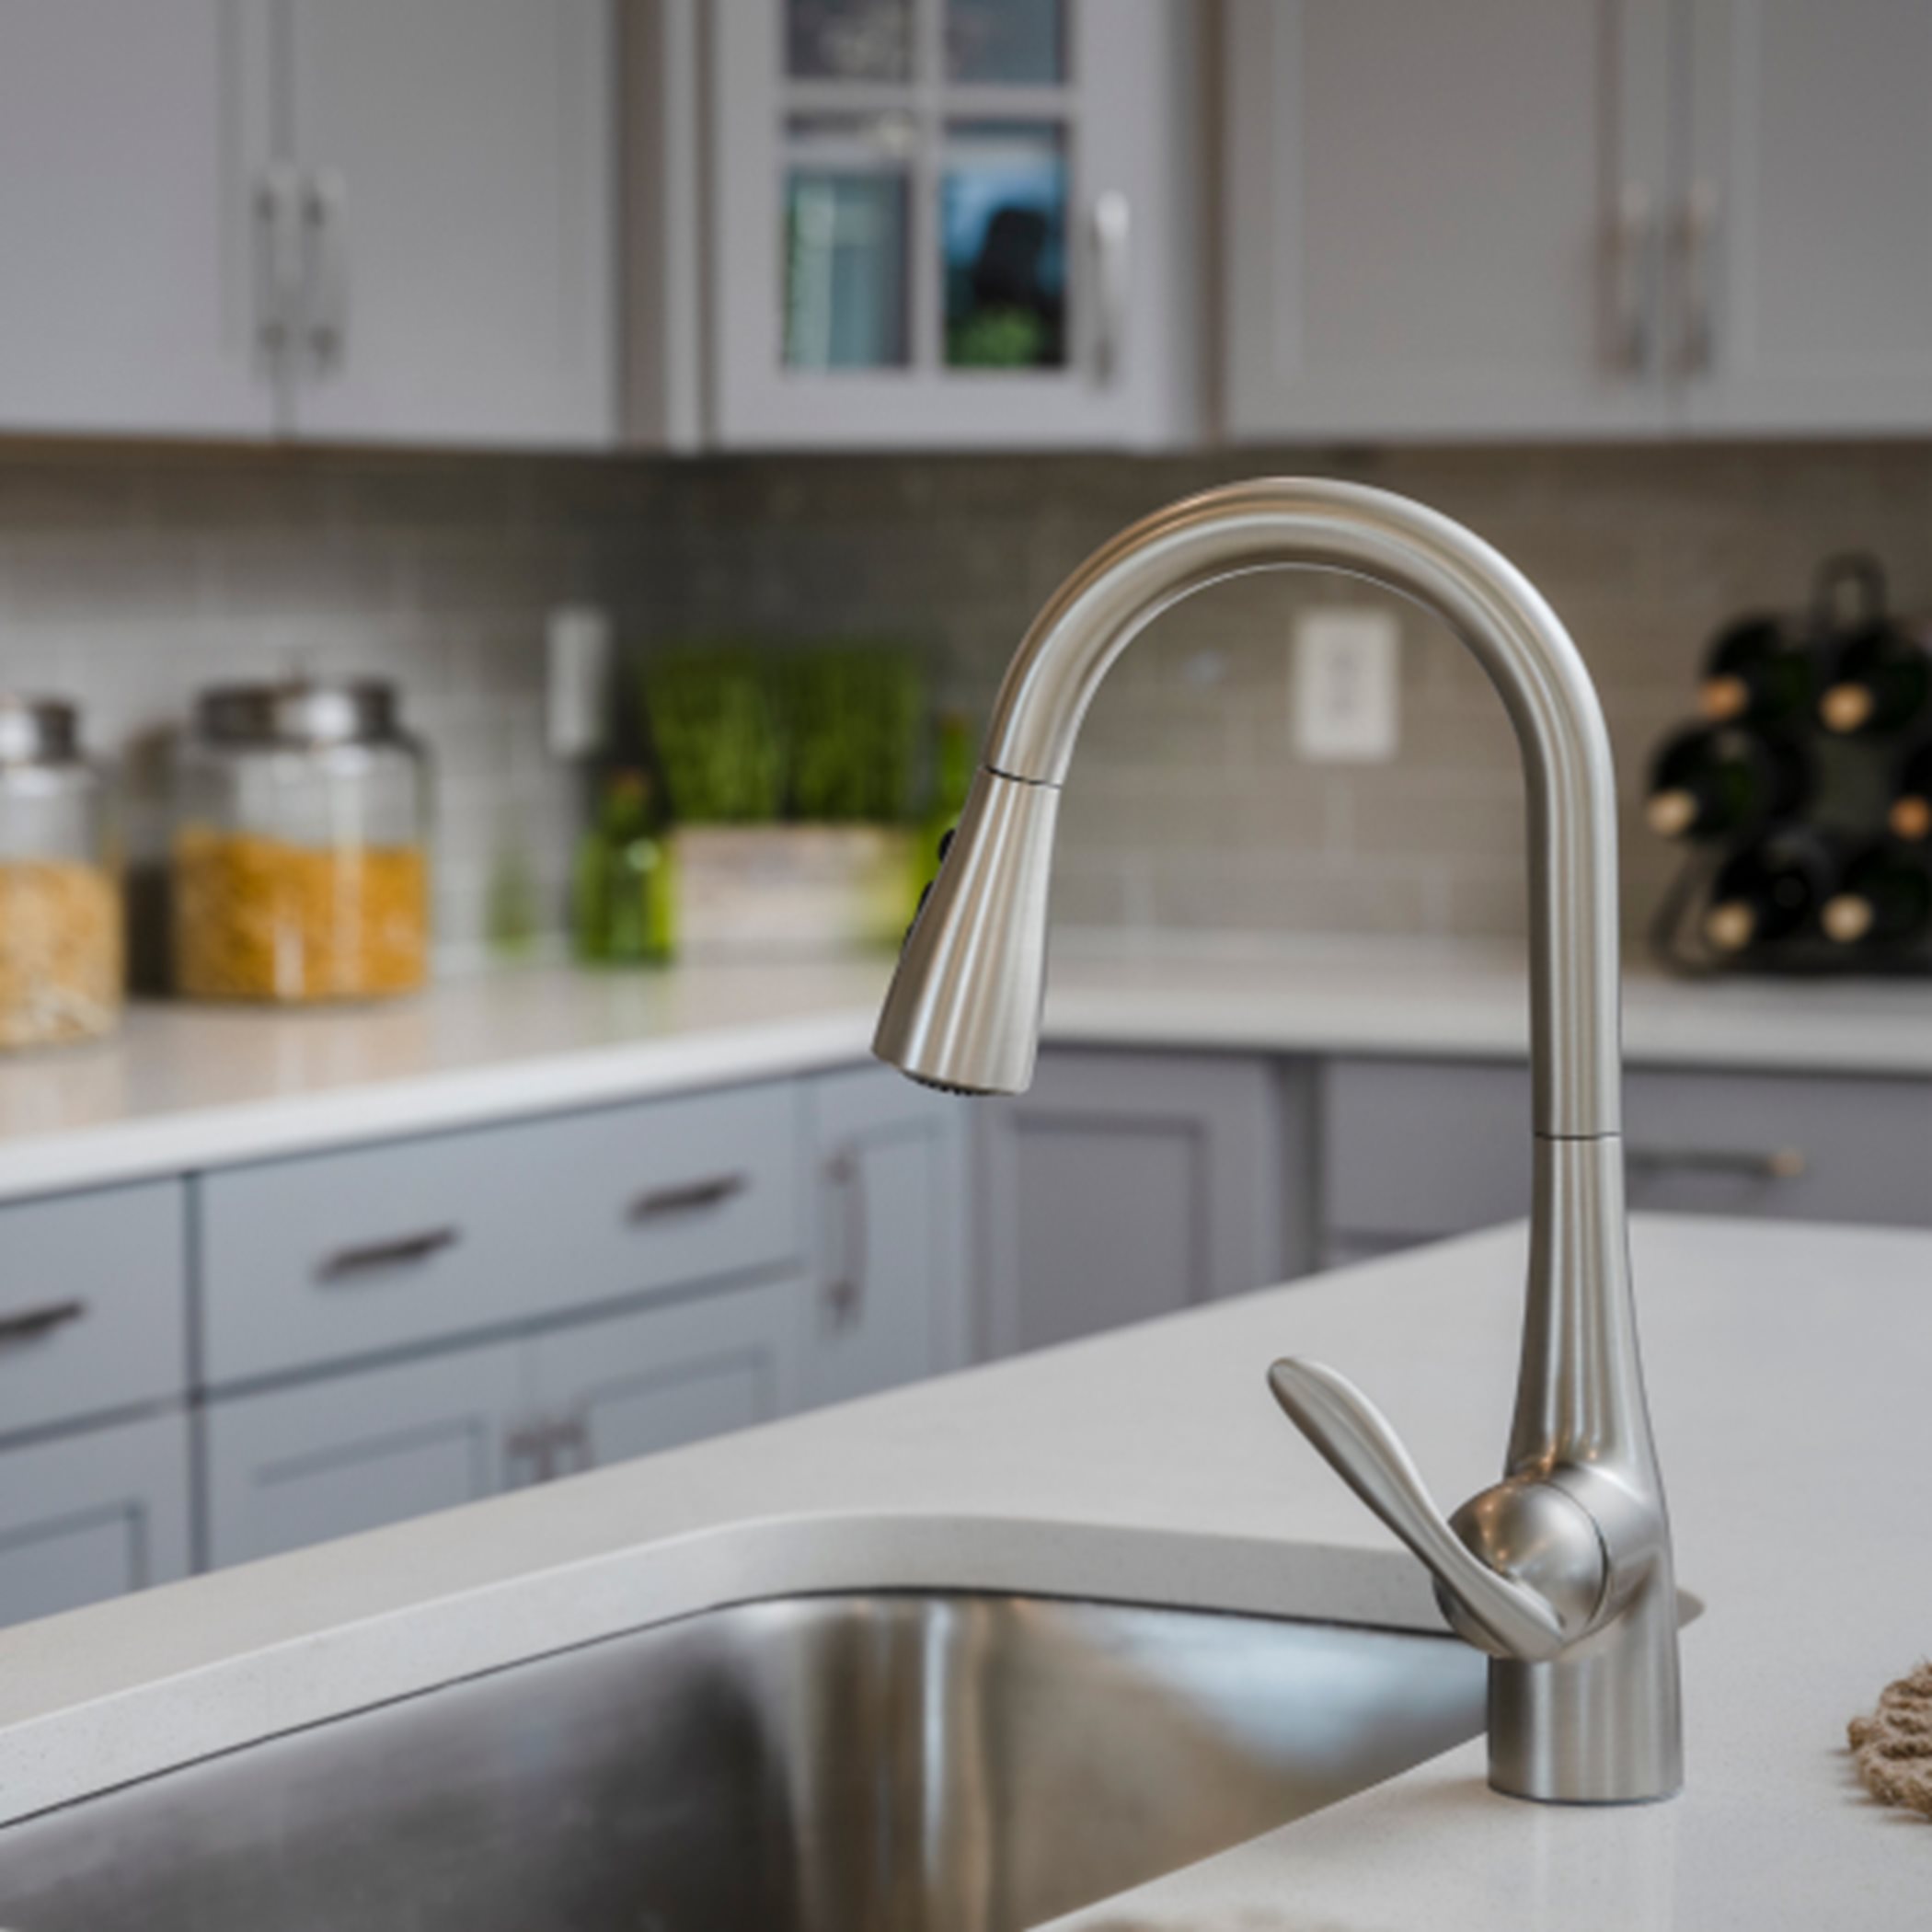 Chesapeake Kitchen Sink and Faucet